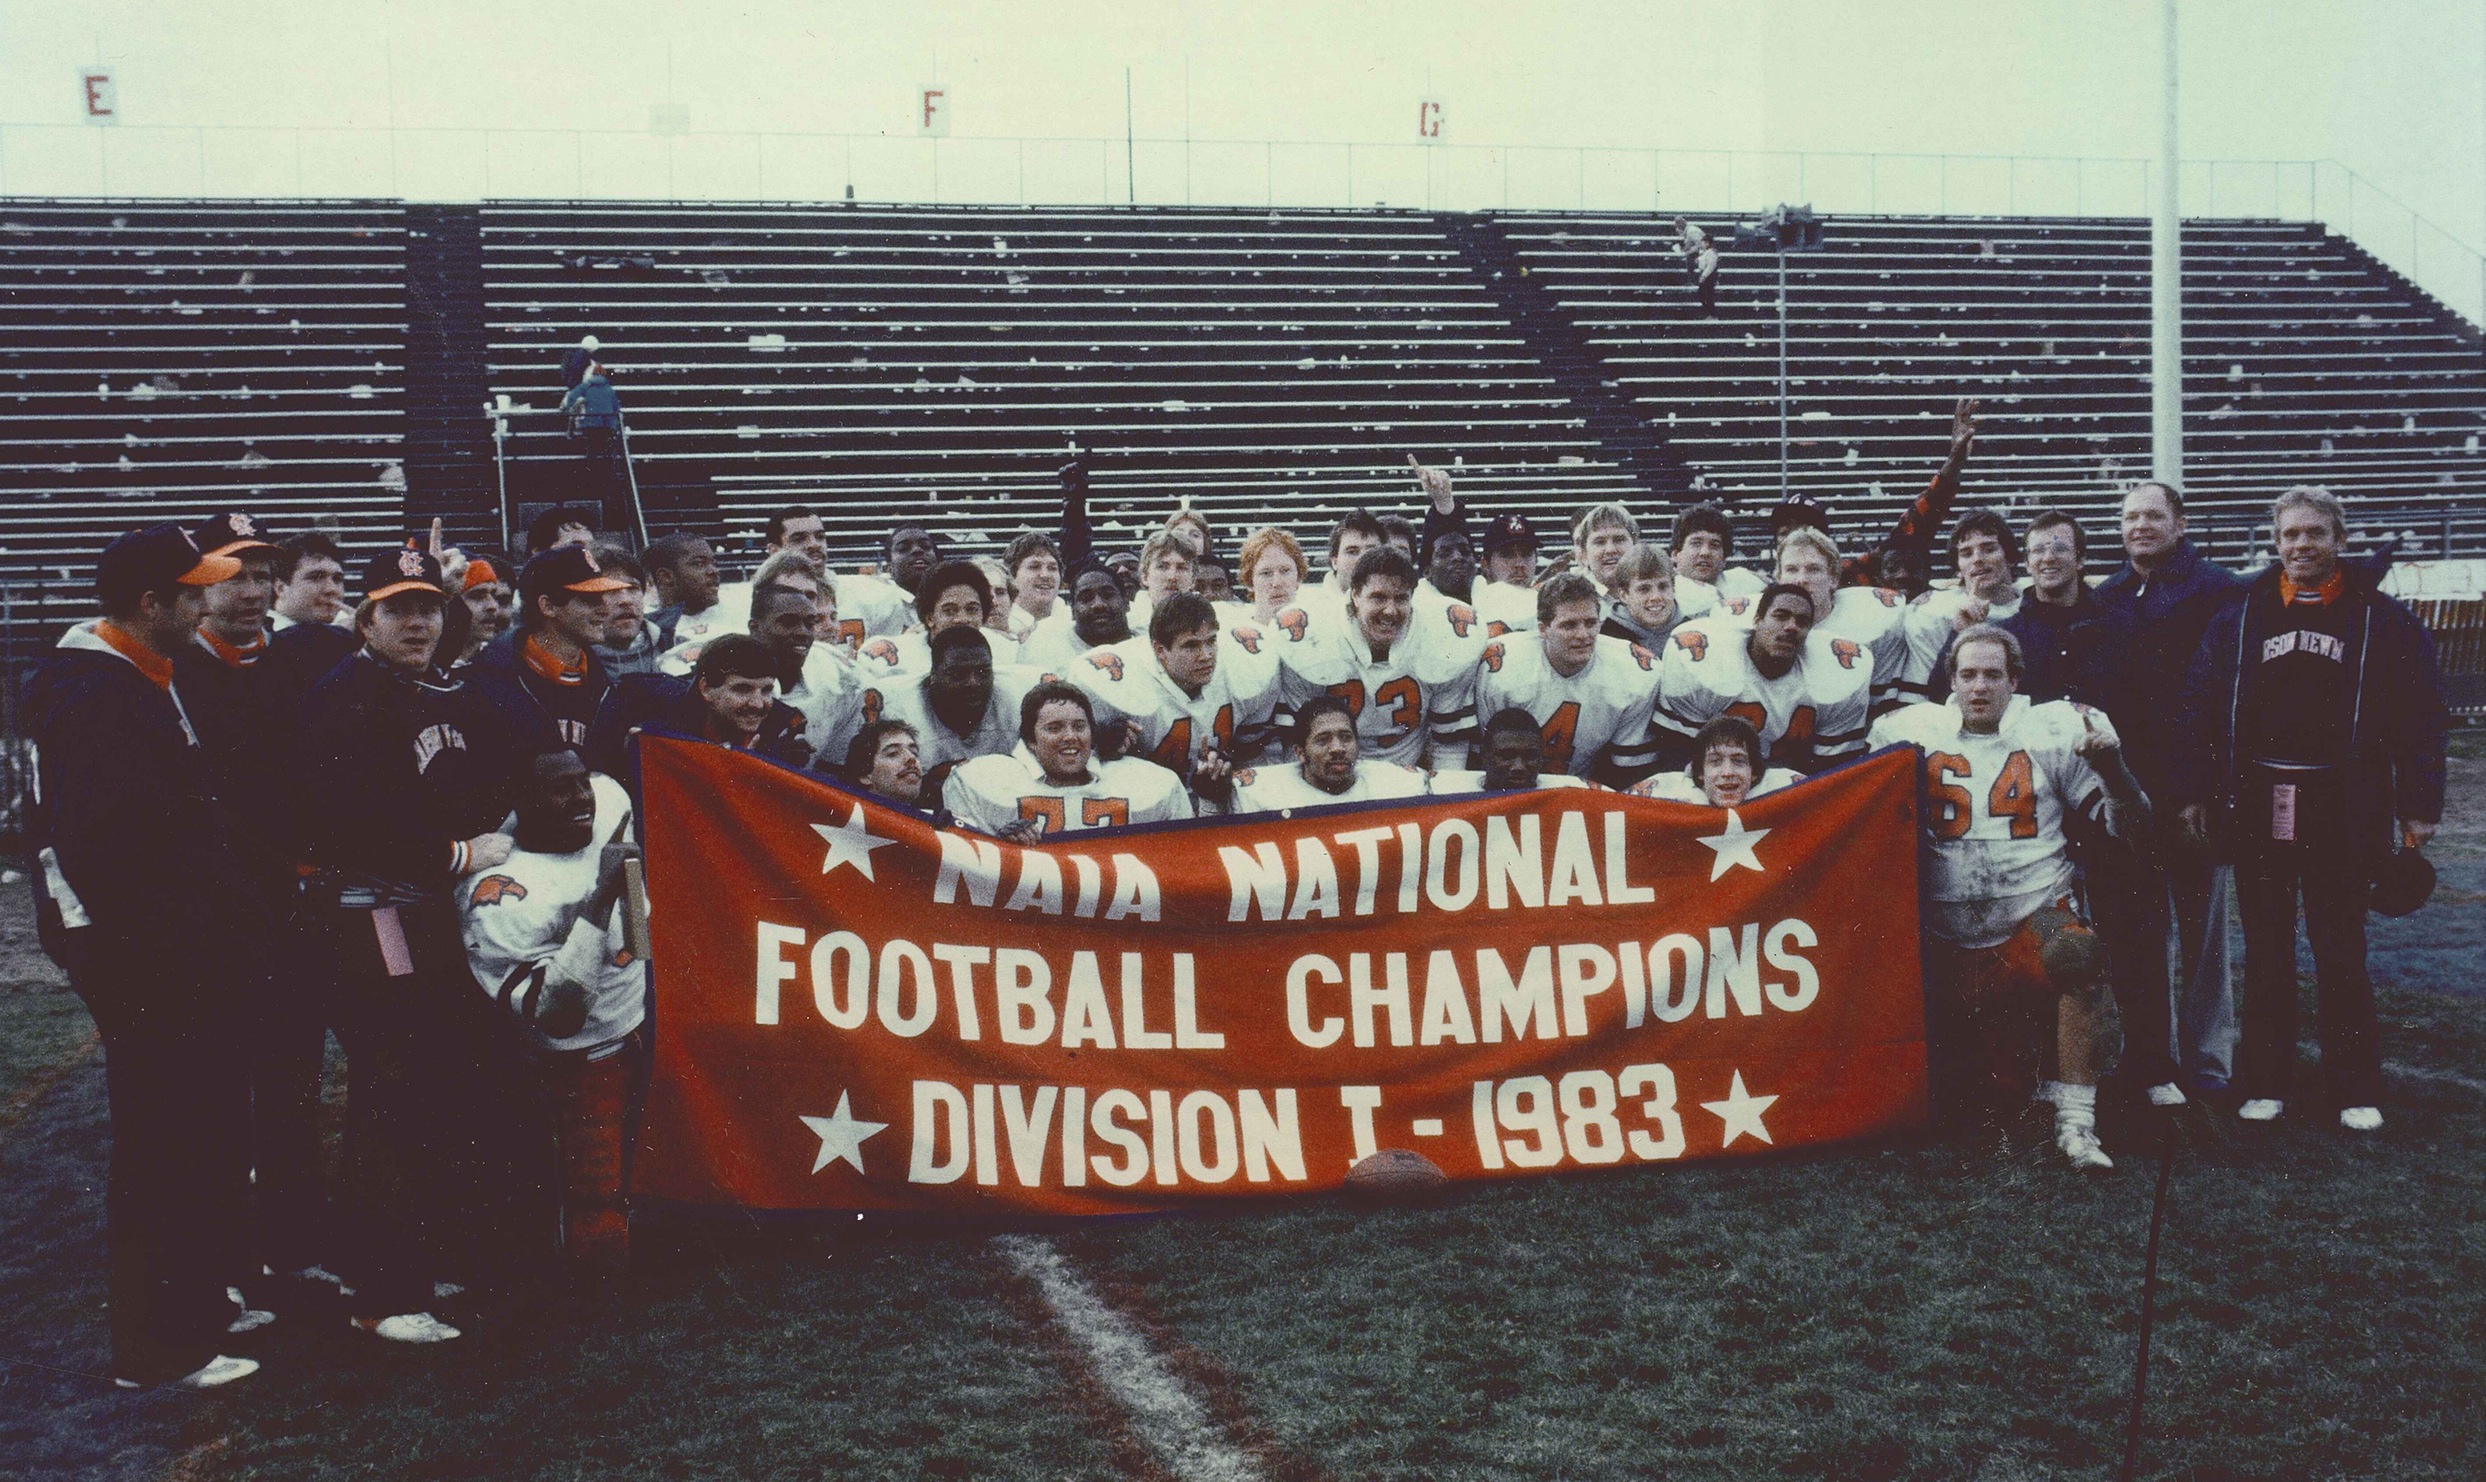 40th anniversary renuion of 1983 national title team set for Sept. 23